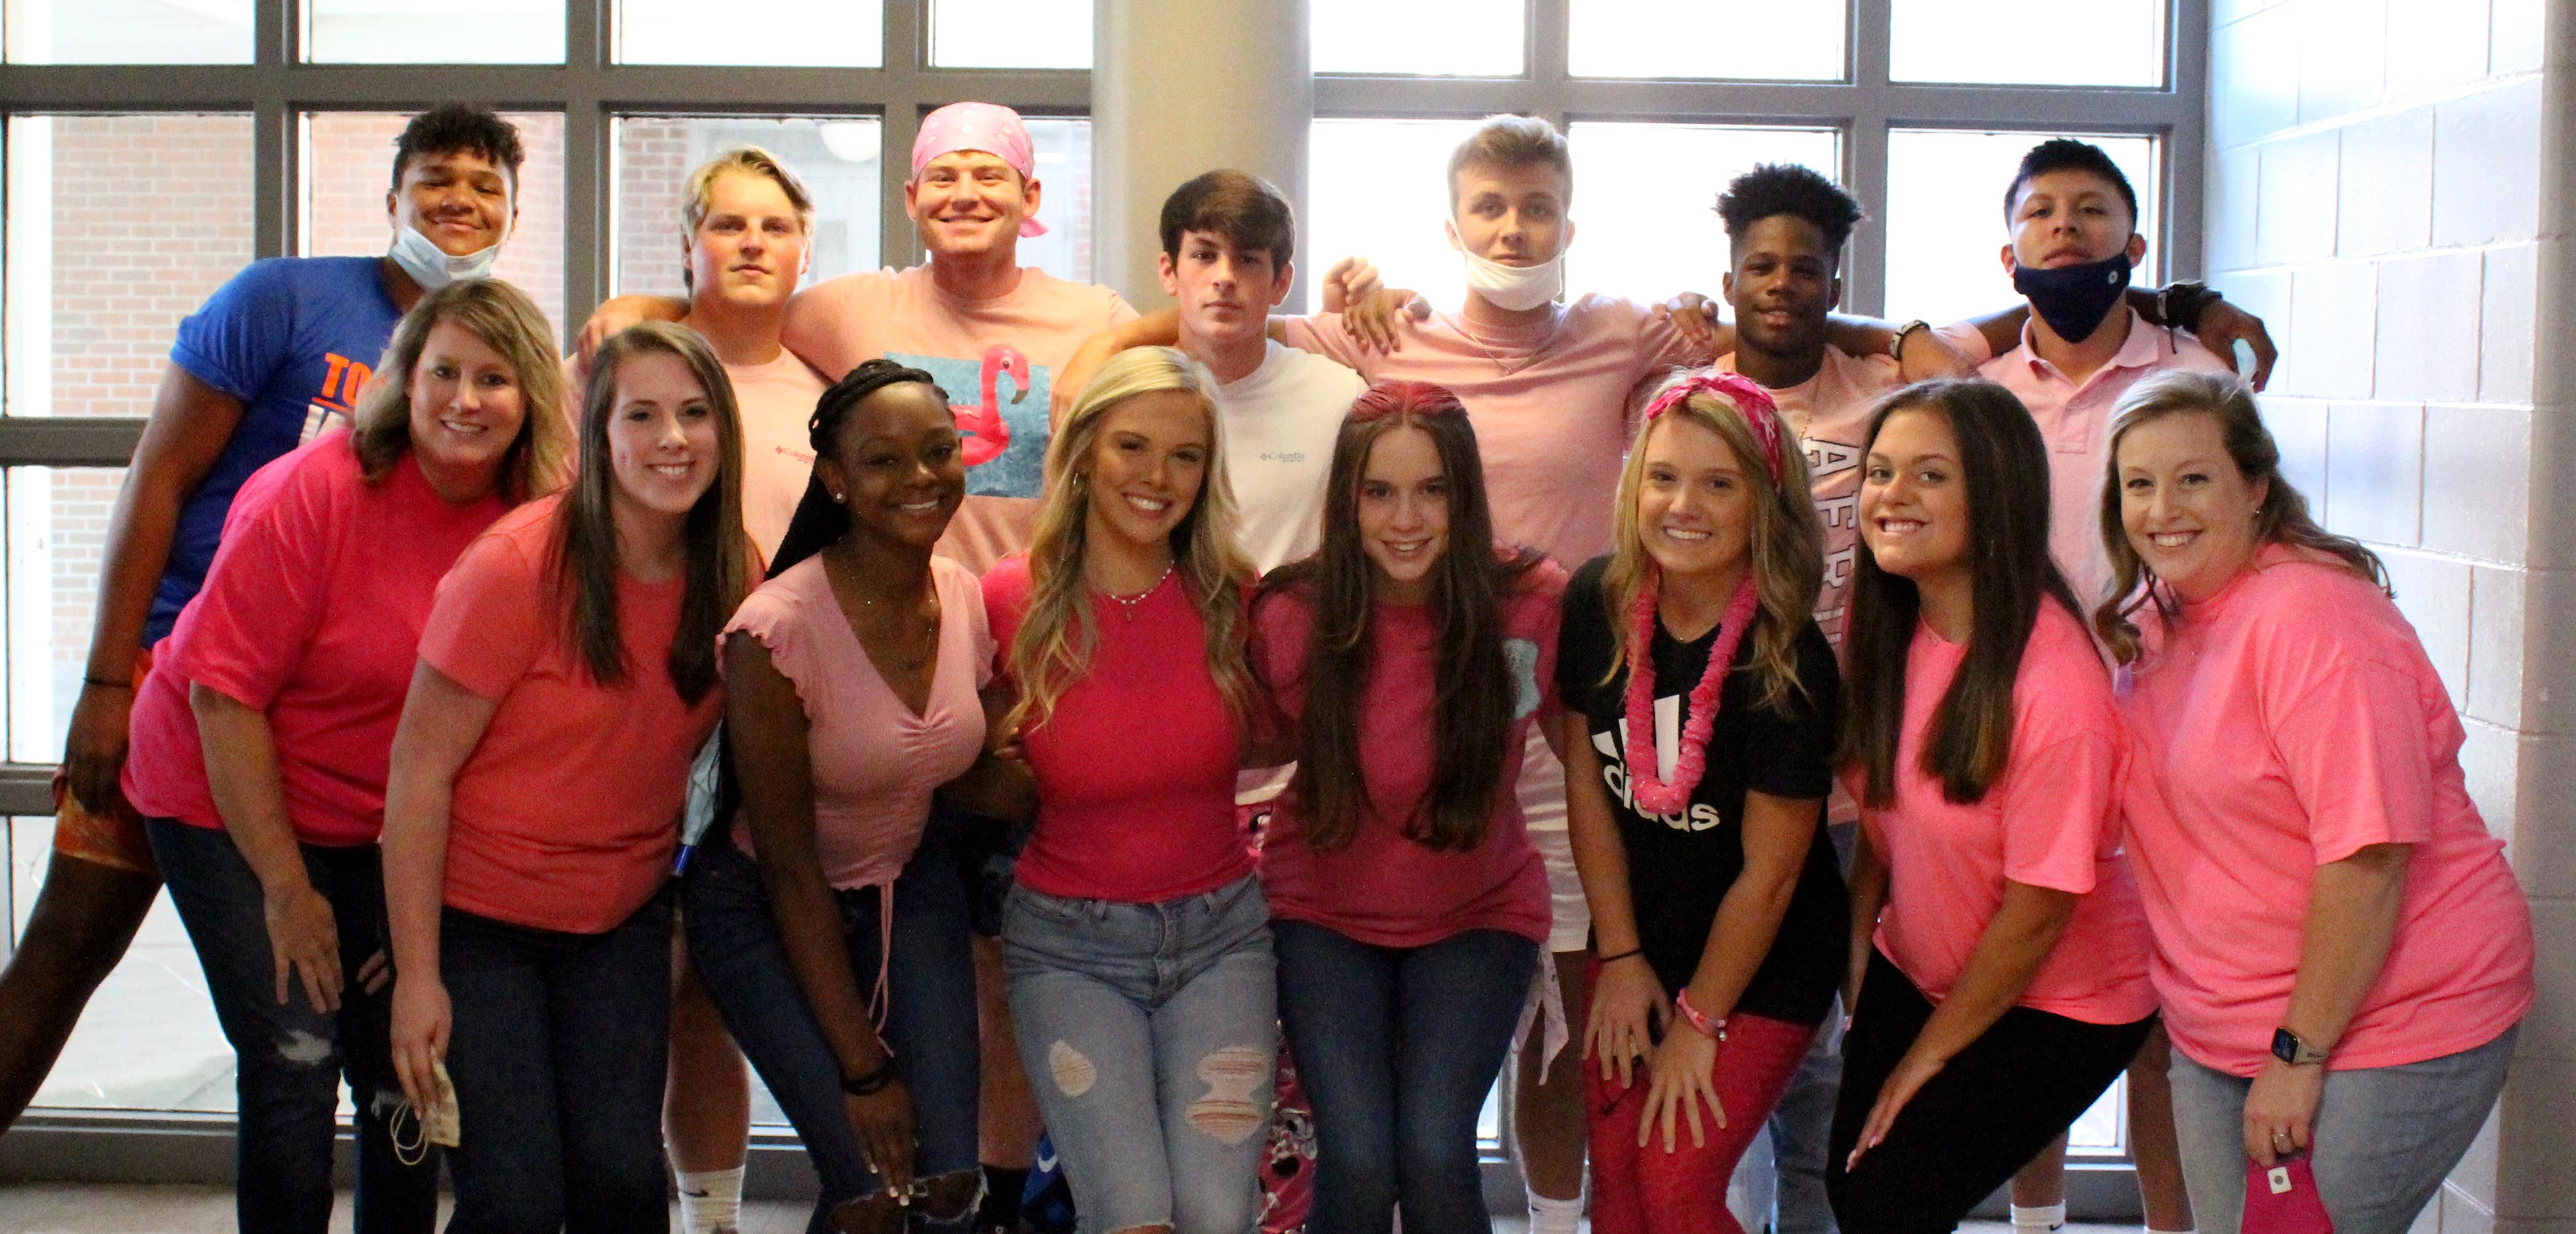 Students and staff wear pink to support the Tigers against Jemison